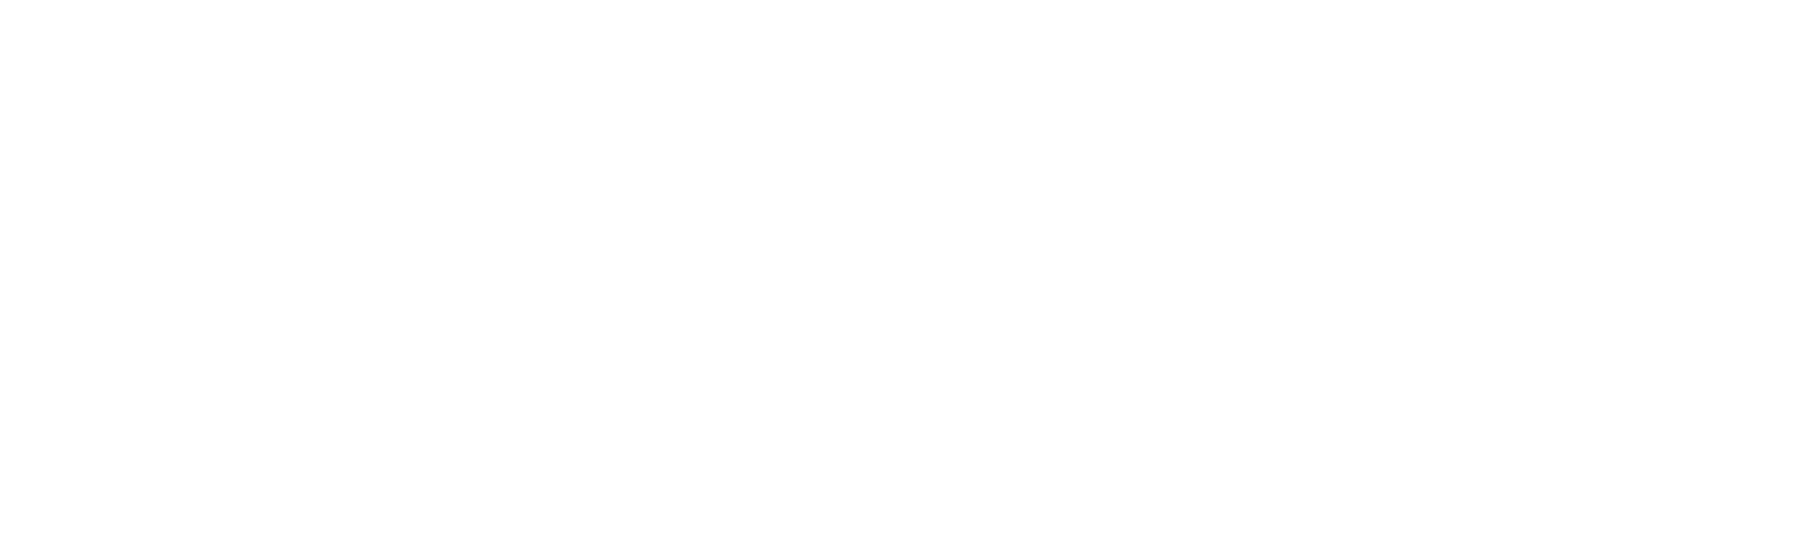 LOGO_mbservis-clean_WHITE